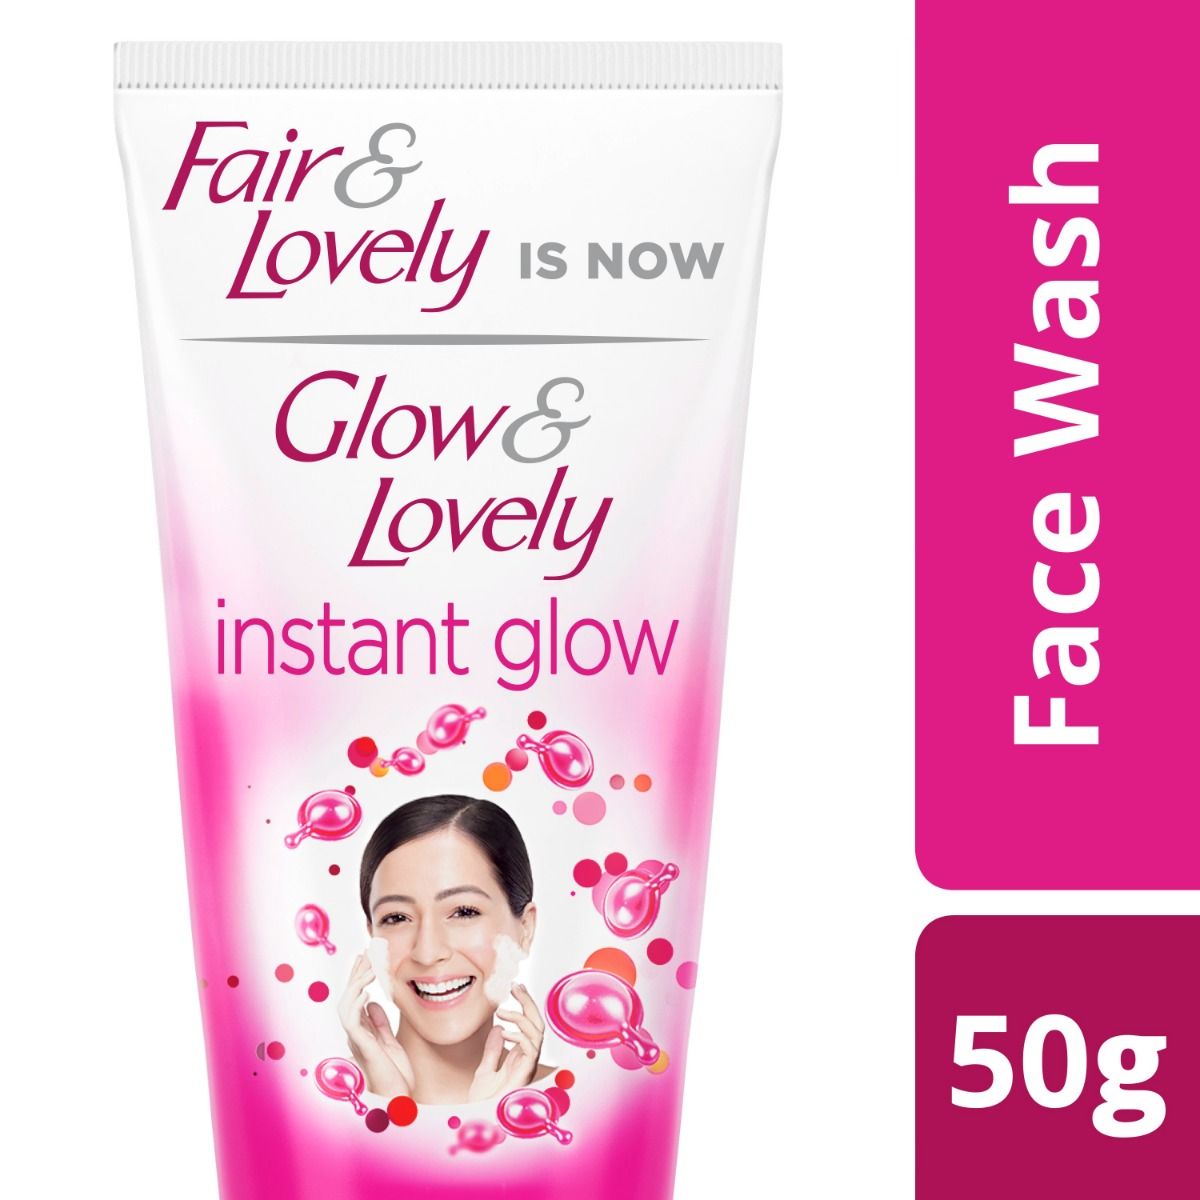 Buy Glow & Lovely Instant Glow Multivitamins Face Wash, 50 gm Online